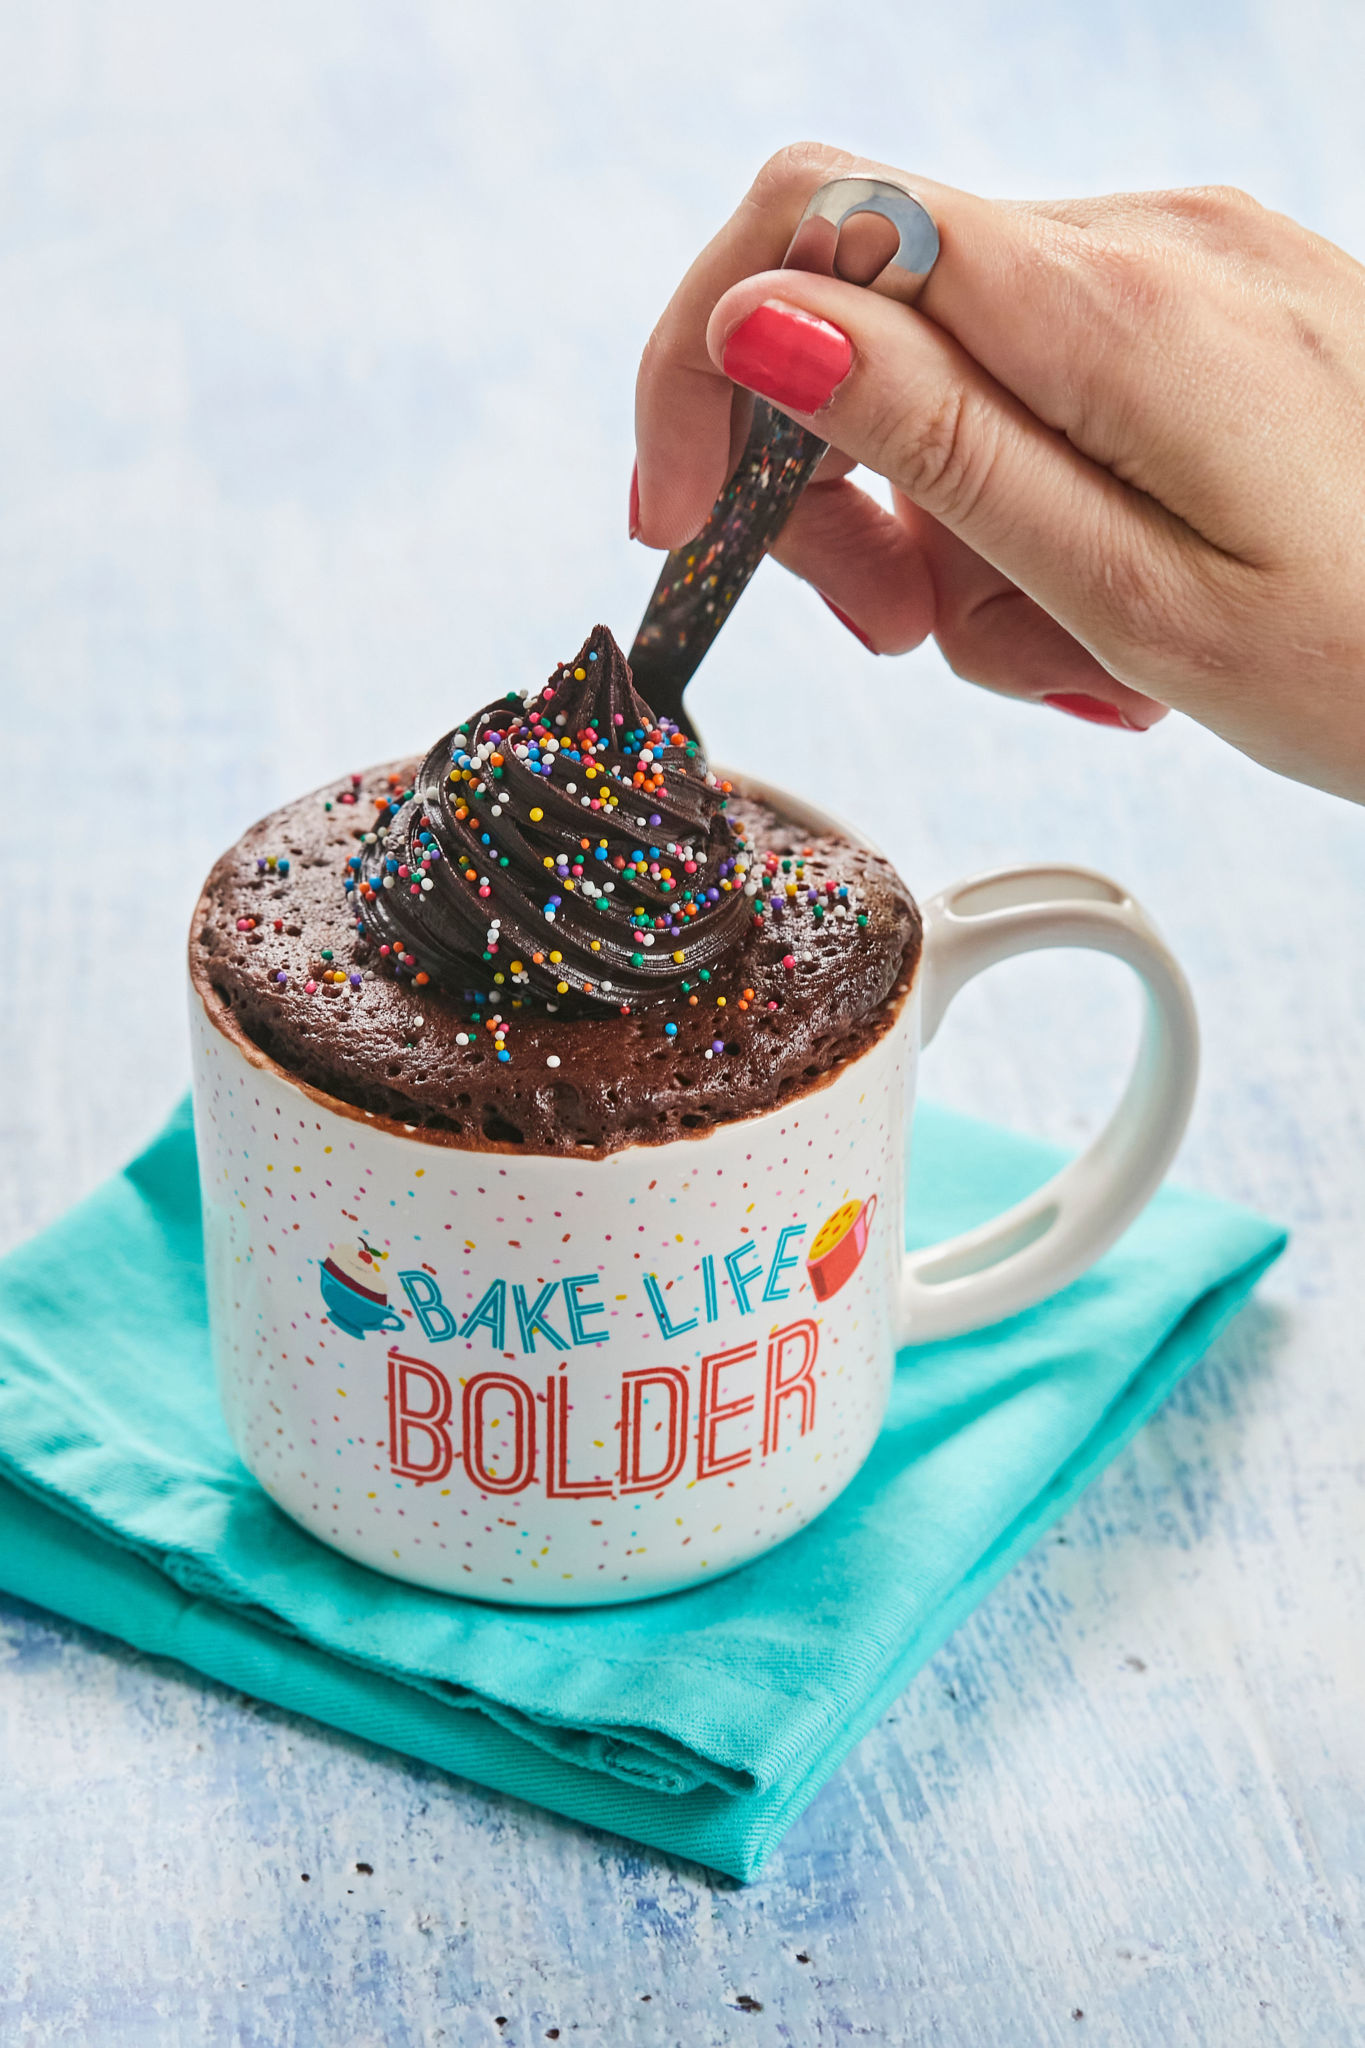 Best-Ever Chocolate Mug Cake is cooked perfectly in a mug, topped with colorful sprinkles. 